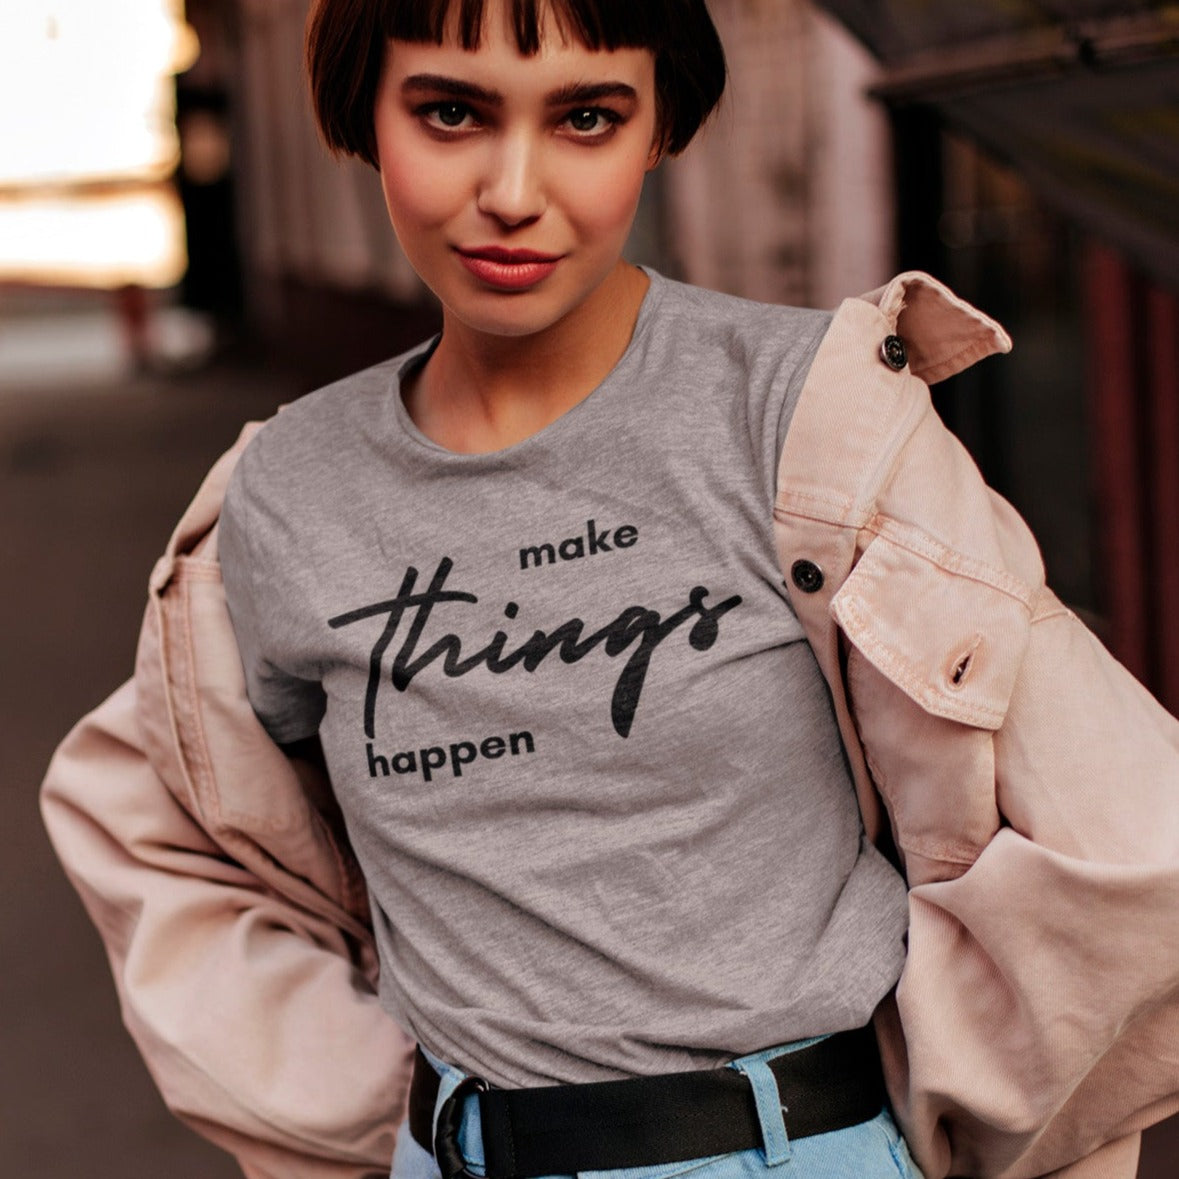 make-things-happen-athletic-heather-t-shirt-women-inspiring-mockup-featuring-a-woman-with-short-hair-posing